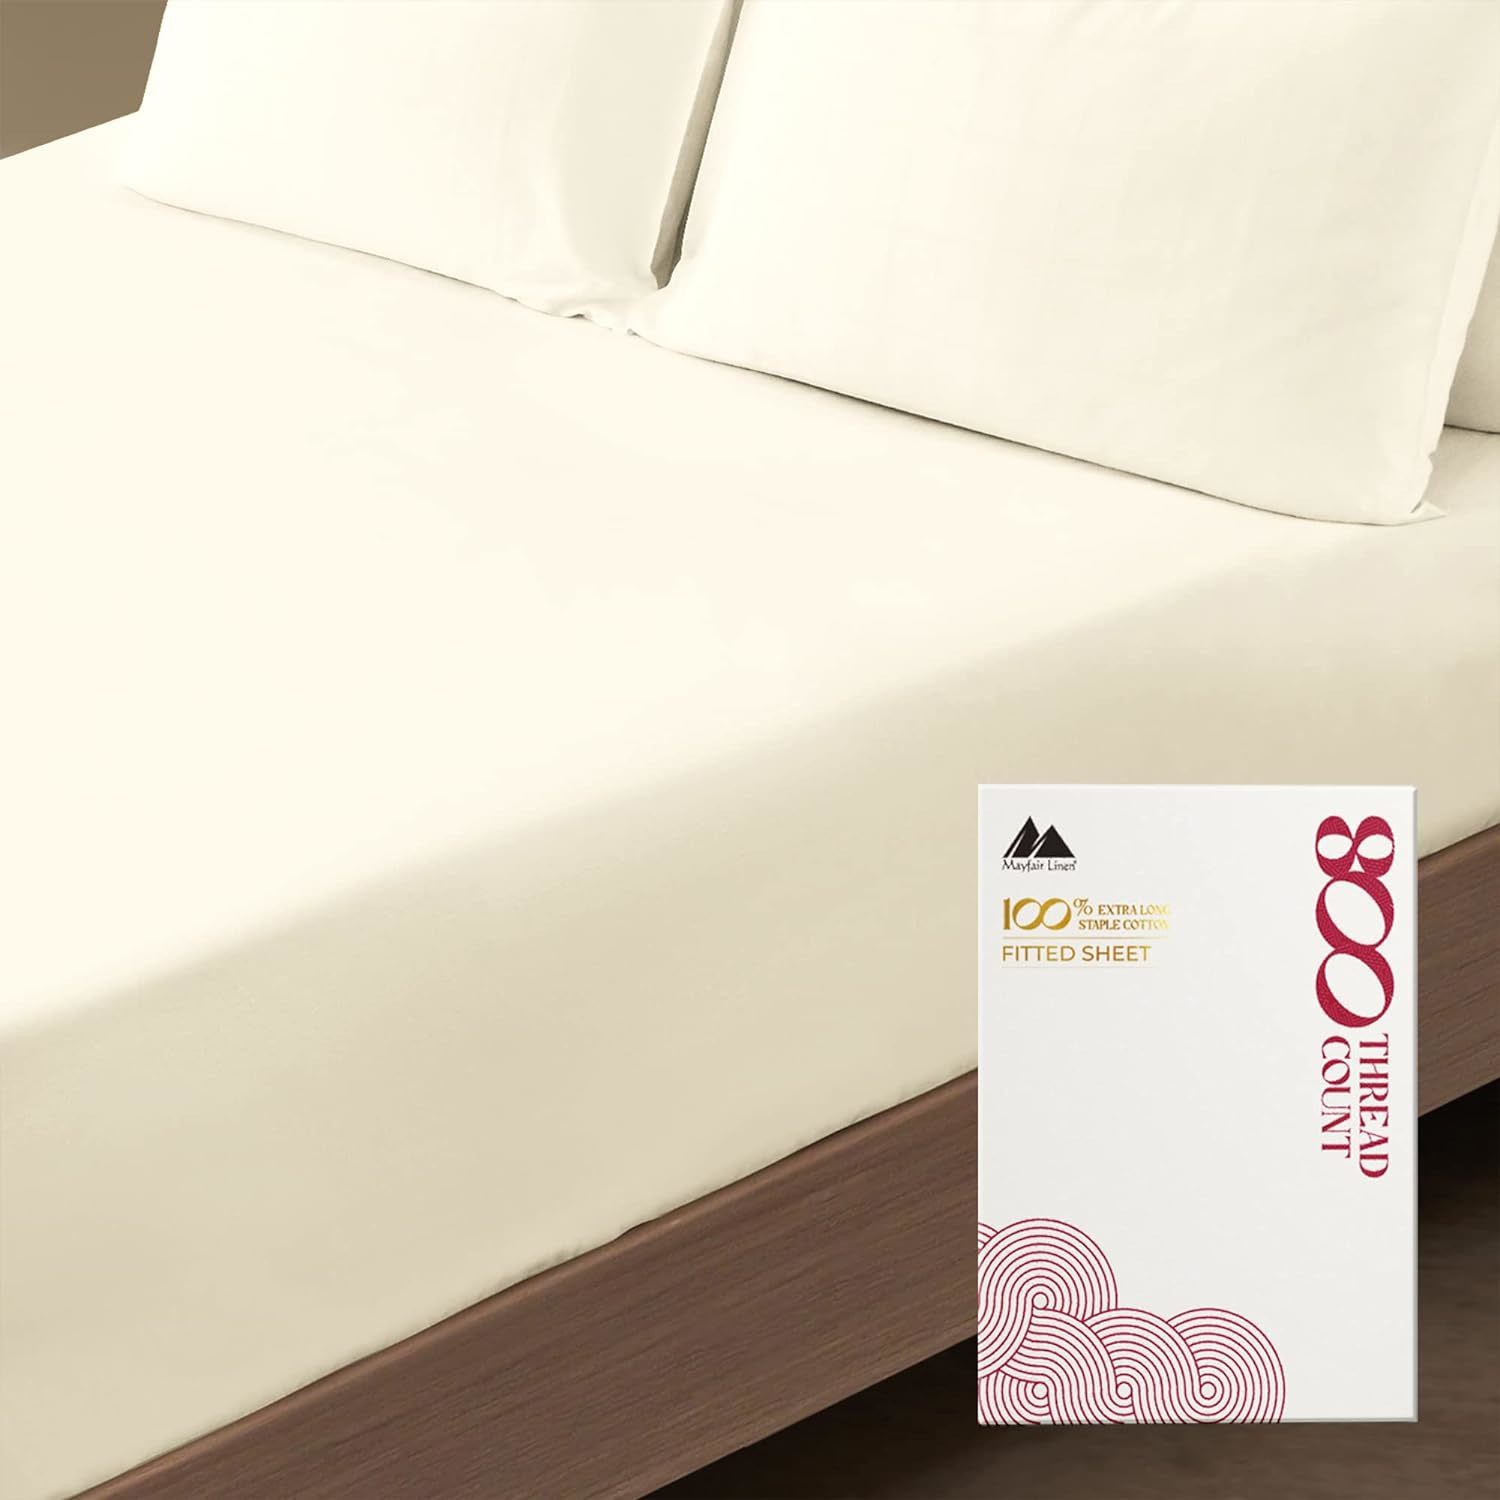 Premium Hotel Quality 1-Pc Cotton Fitted Sheet, Luxury Softest 800 Thread Count  - $67.99